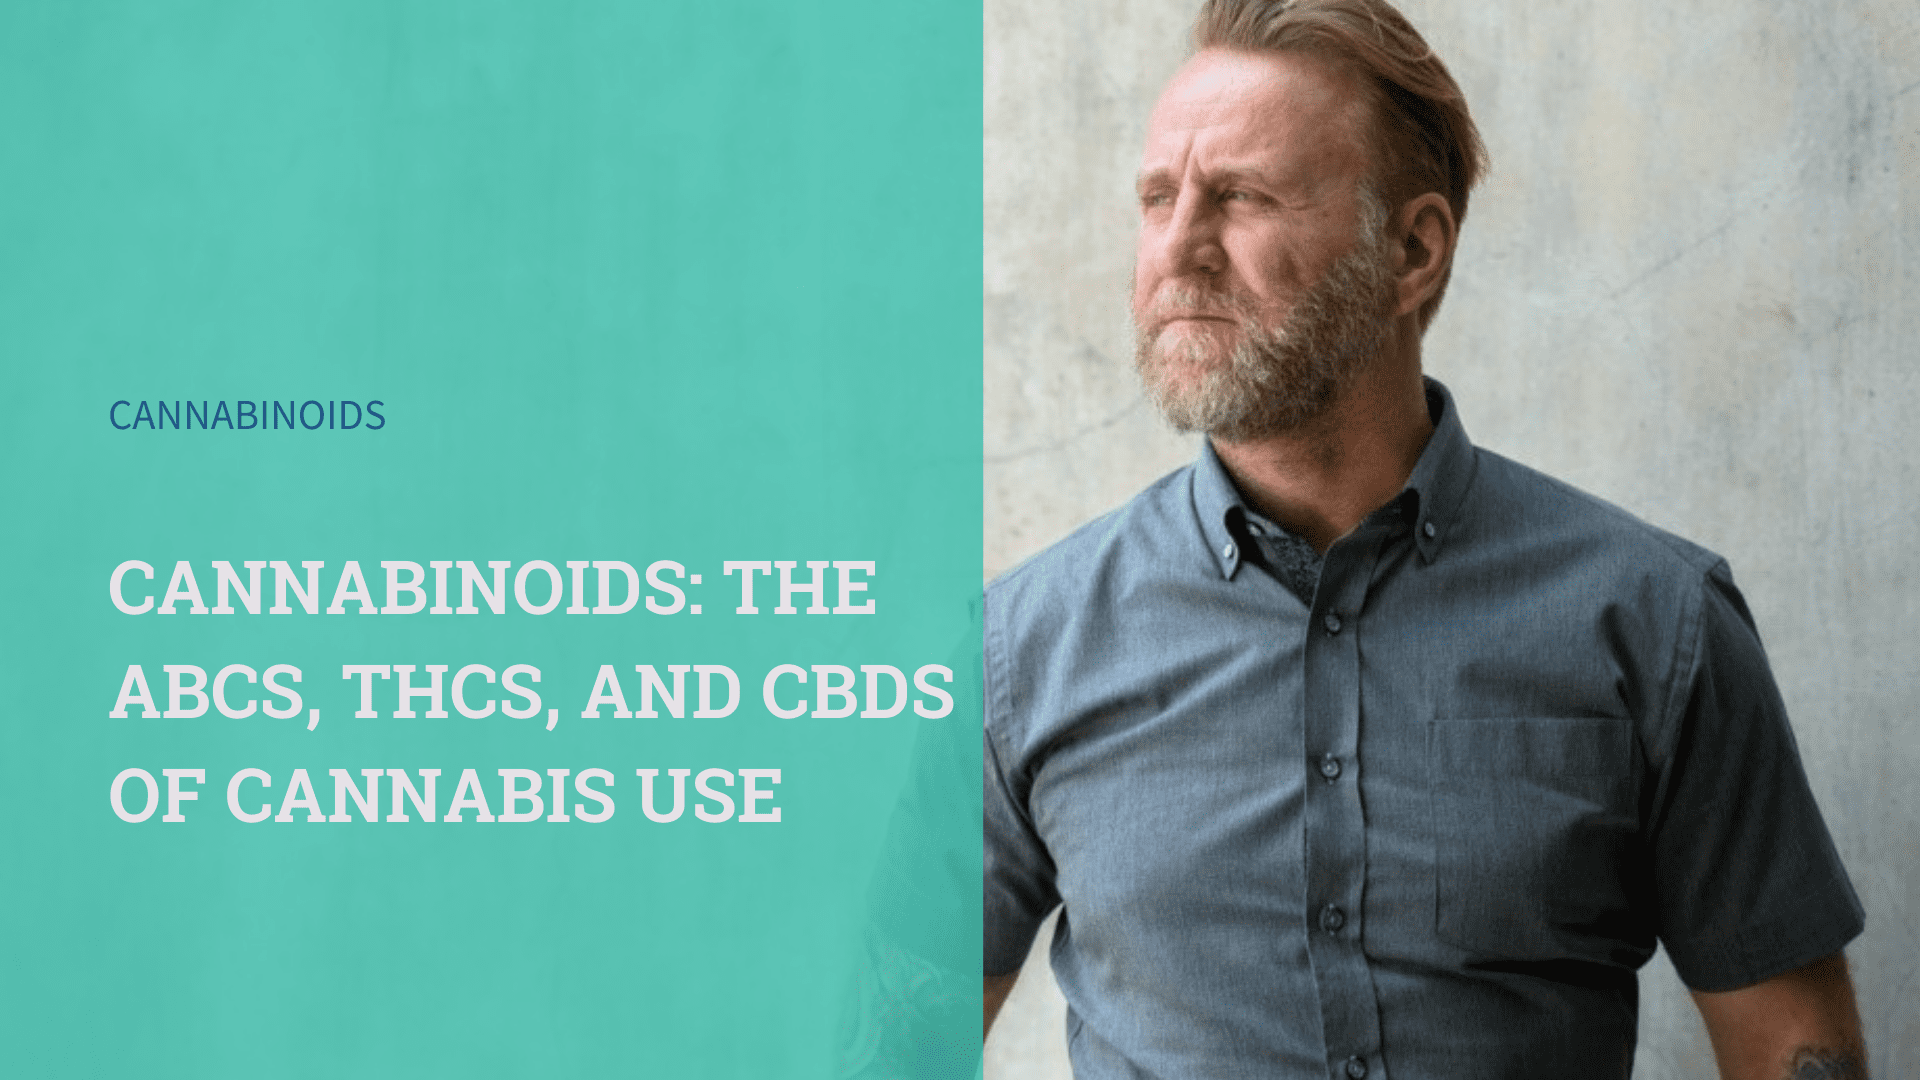 Cannabinoids The ABCs, THCs, and CBDs of Cannabis Use